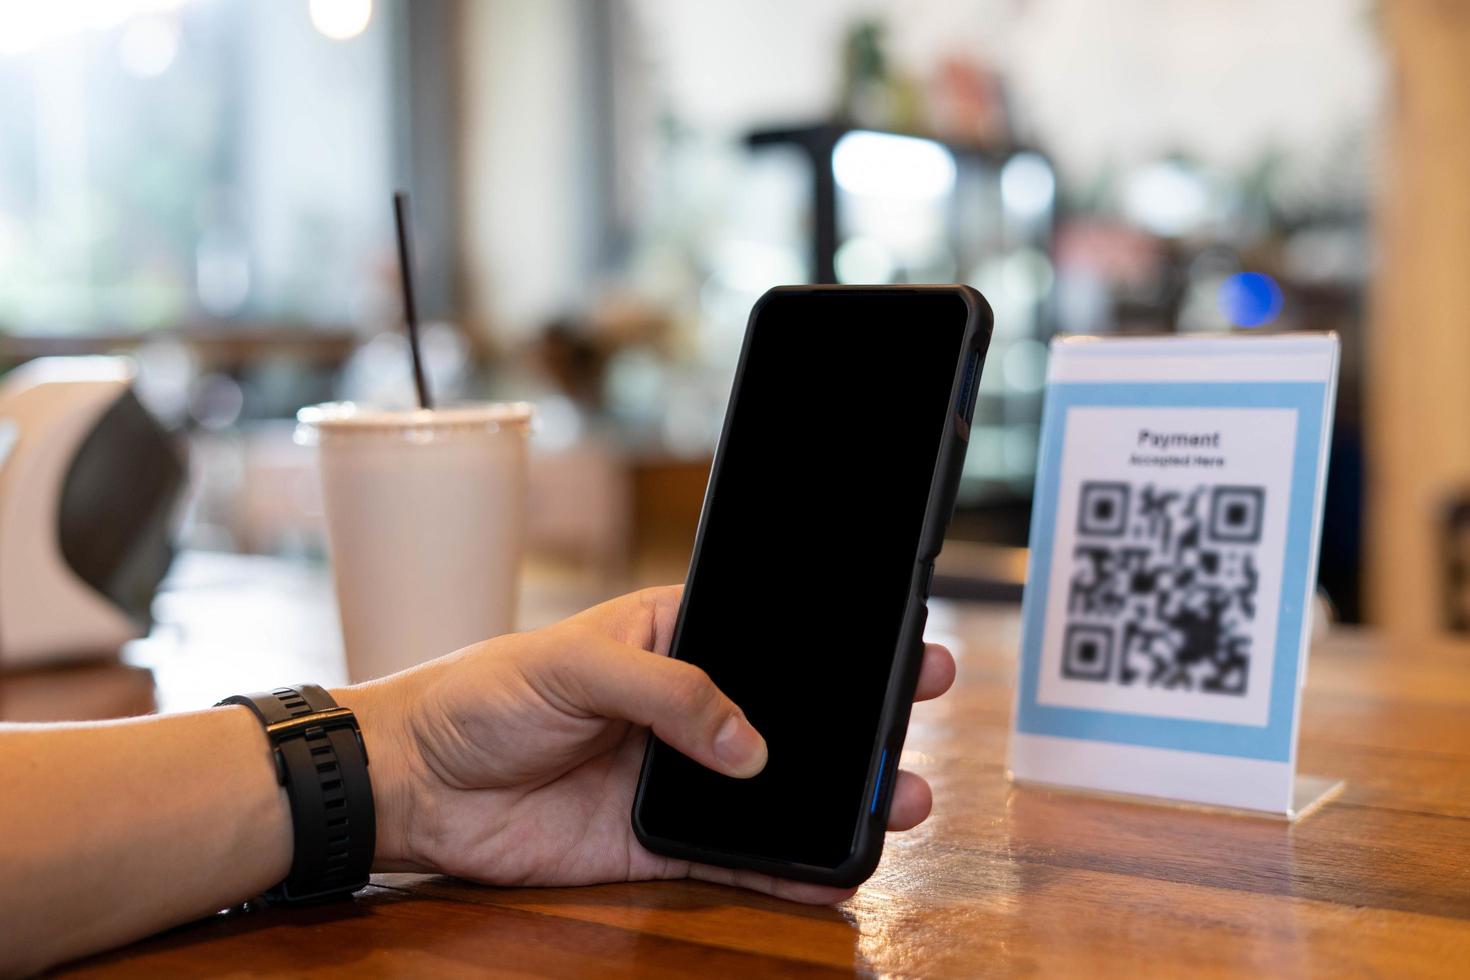 man use smartphone to scan QR code to pay in cafe restaurant with a digital payment without cash. Choose menu and order accumulate discount. E wallet, technology, pay online, credit card, bank app photo